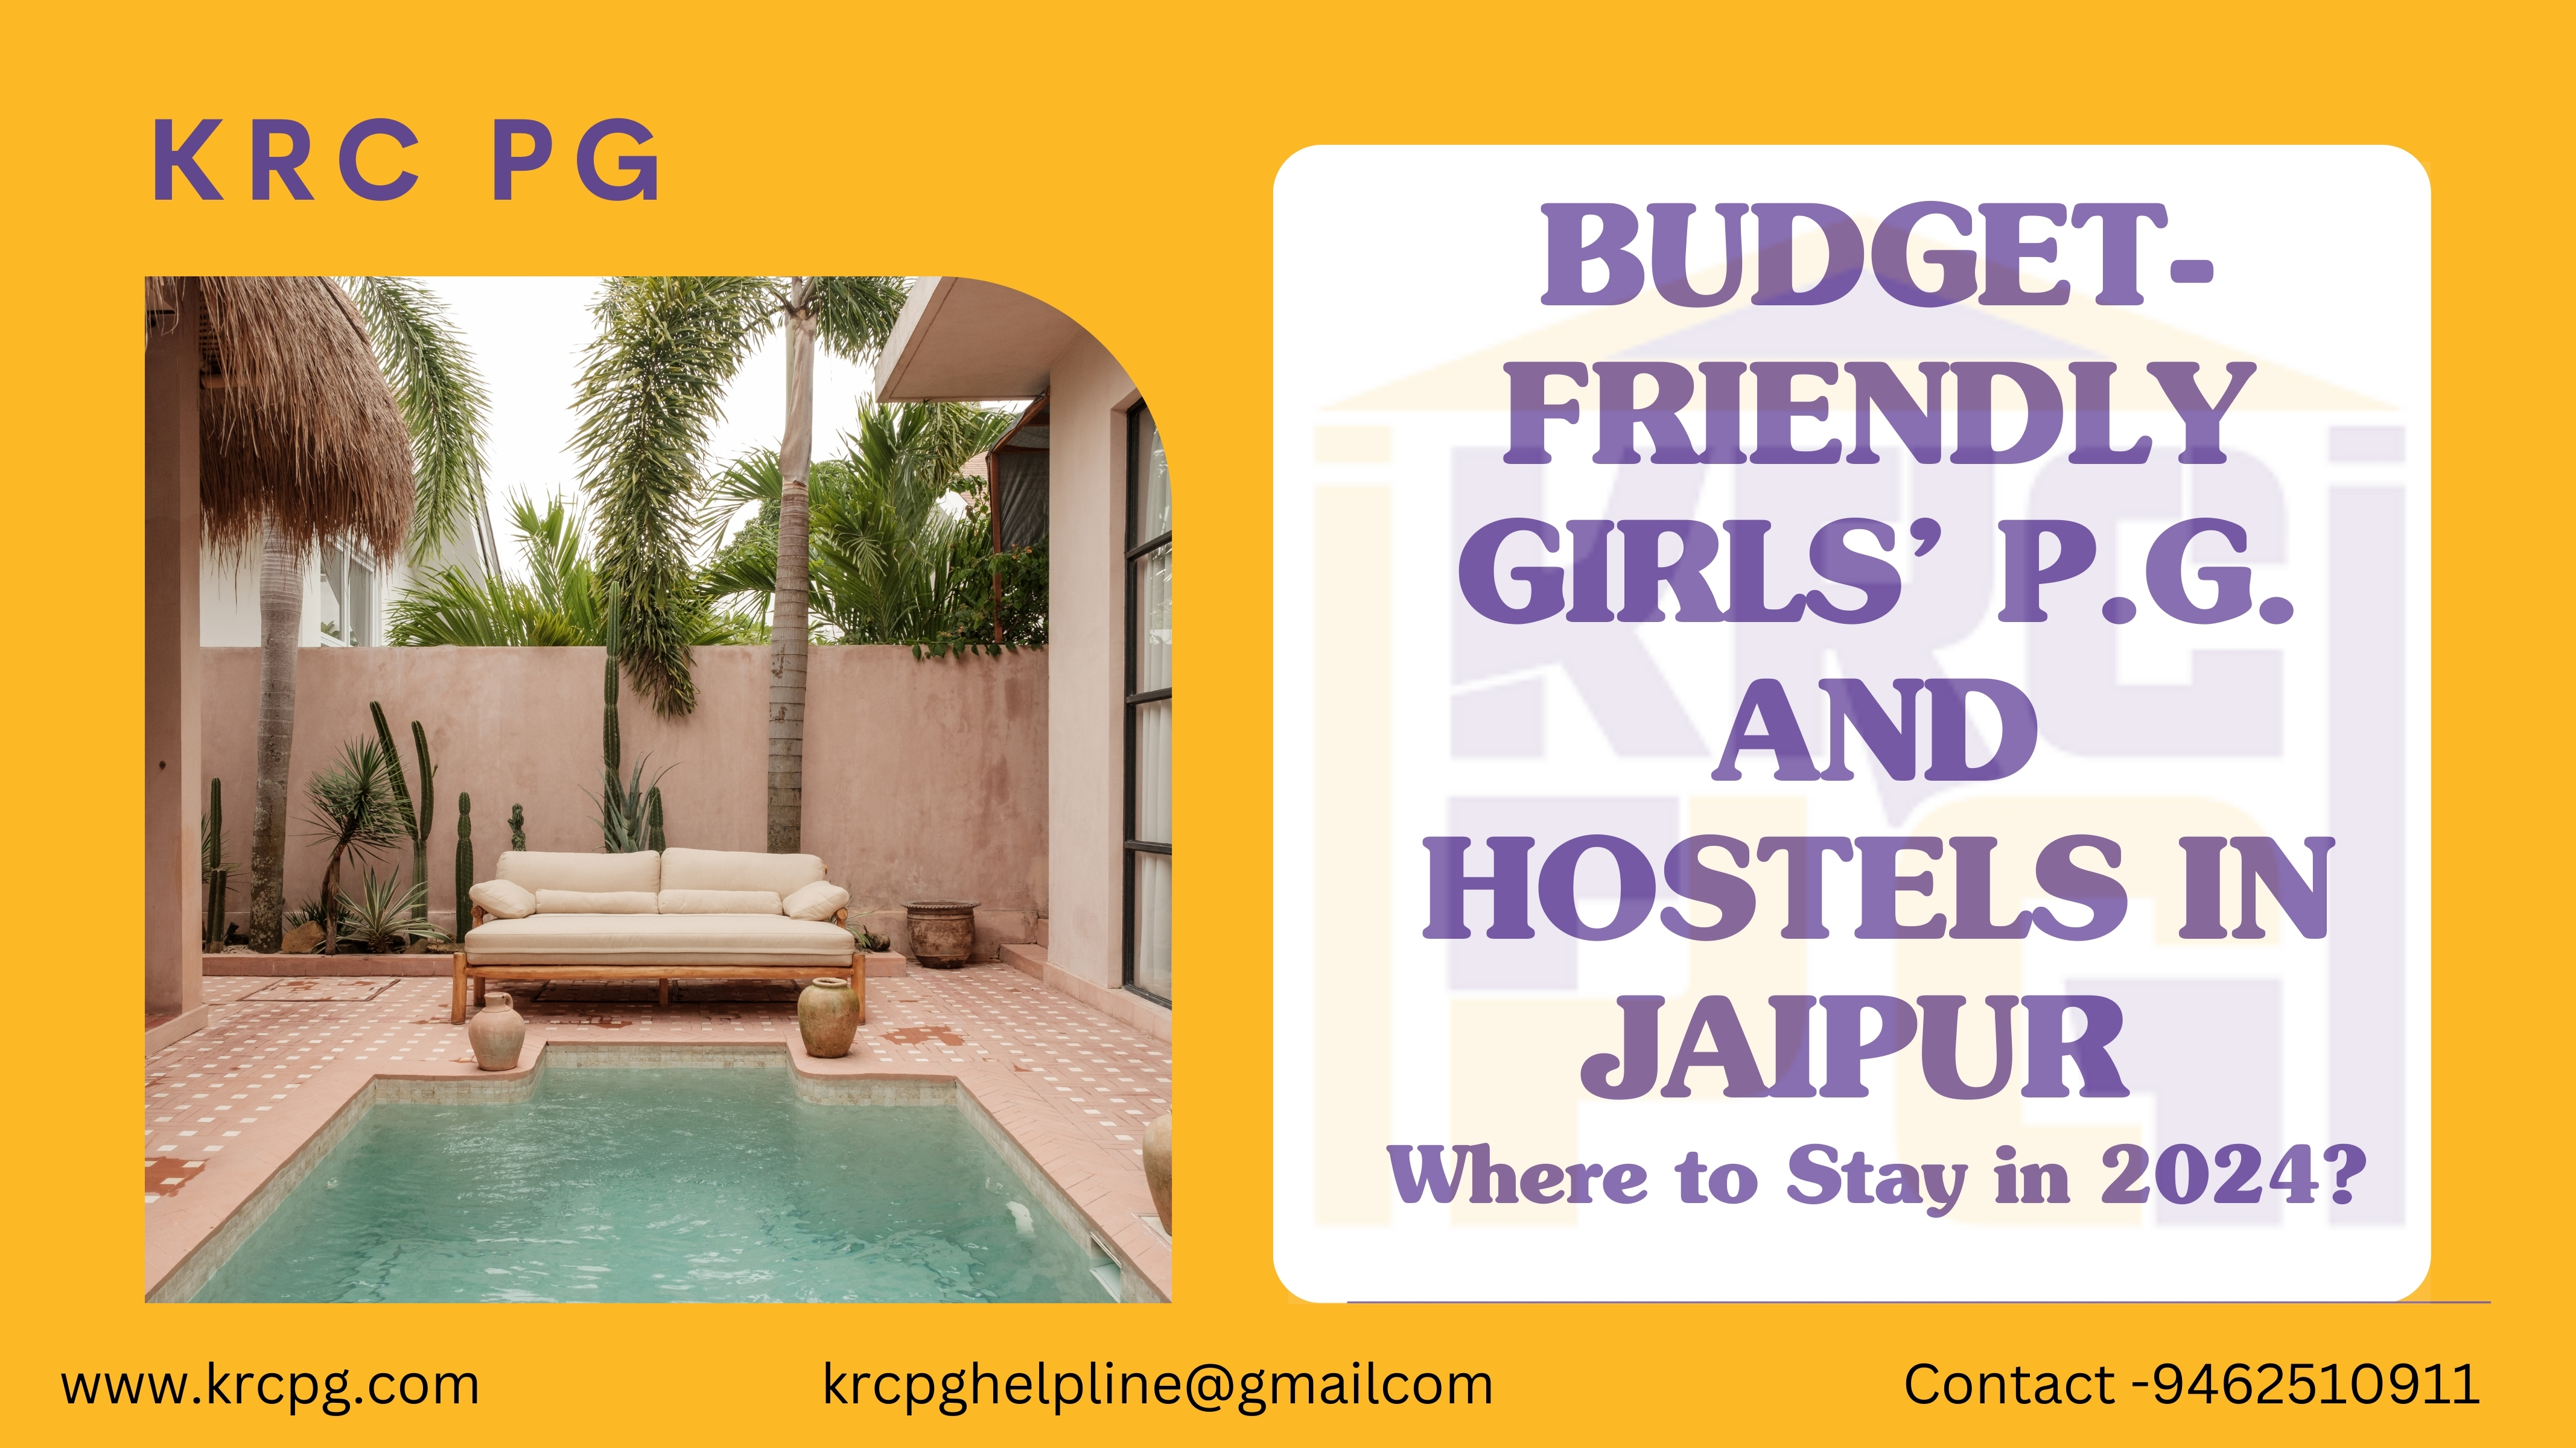 BUDGET-FRIENDLY GIRLS P.G. AND HOSTELS IN JAIPUR: Where to Stay in 2024?